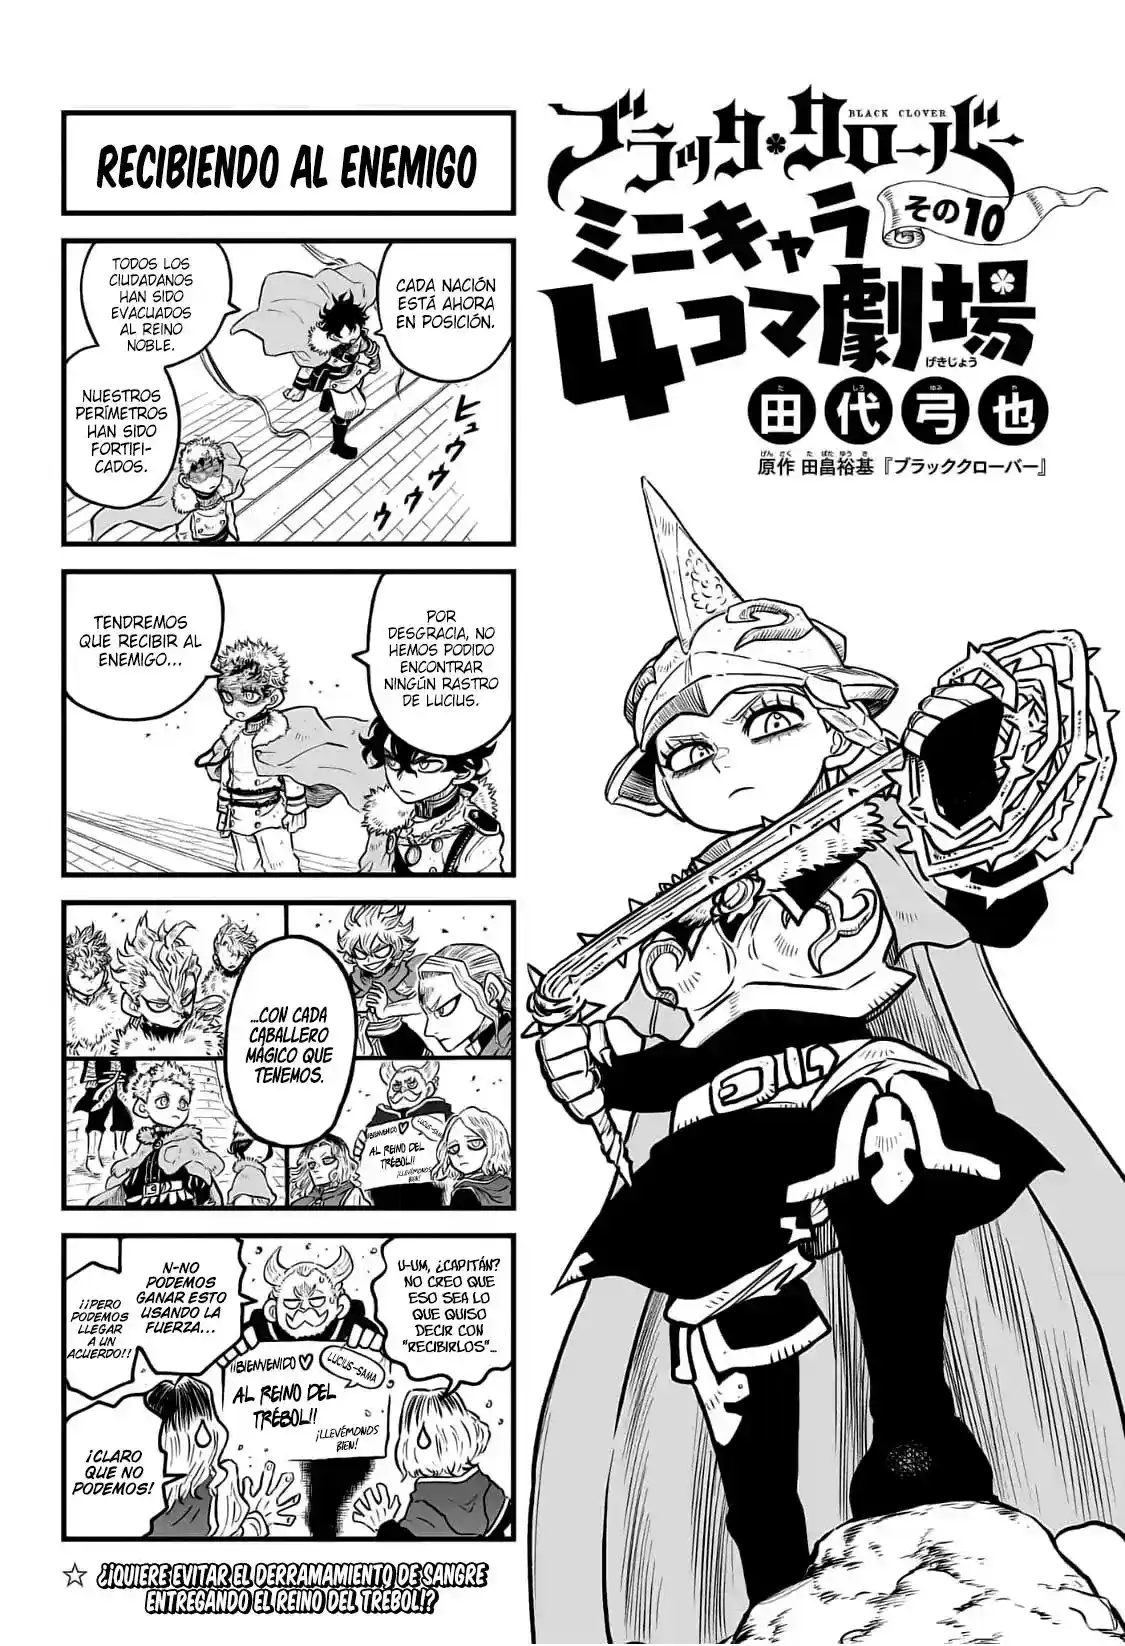 Black Clover: Chapter 367 - Page 1